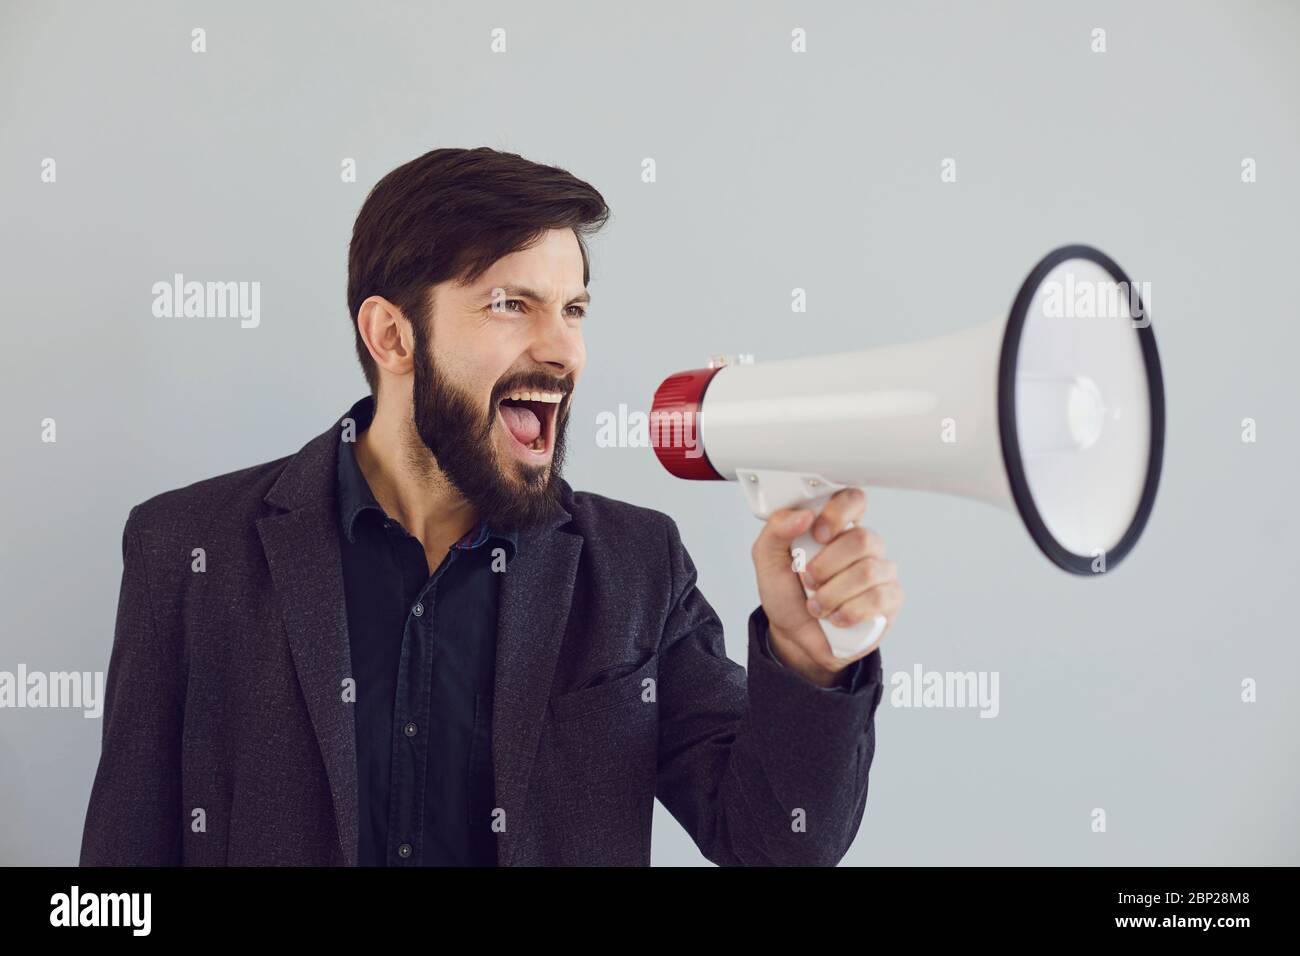 A man in a jacket shouts in a bullhorn on a gray background. Stock Photo